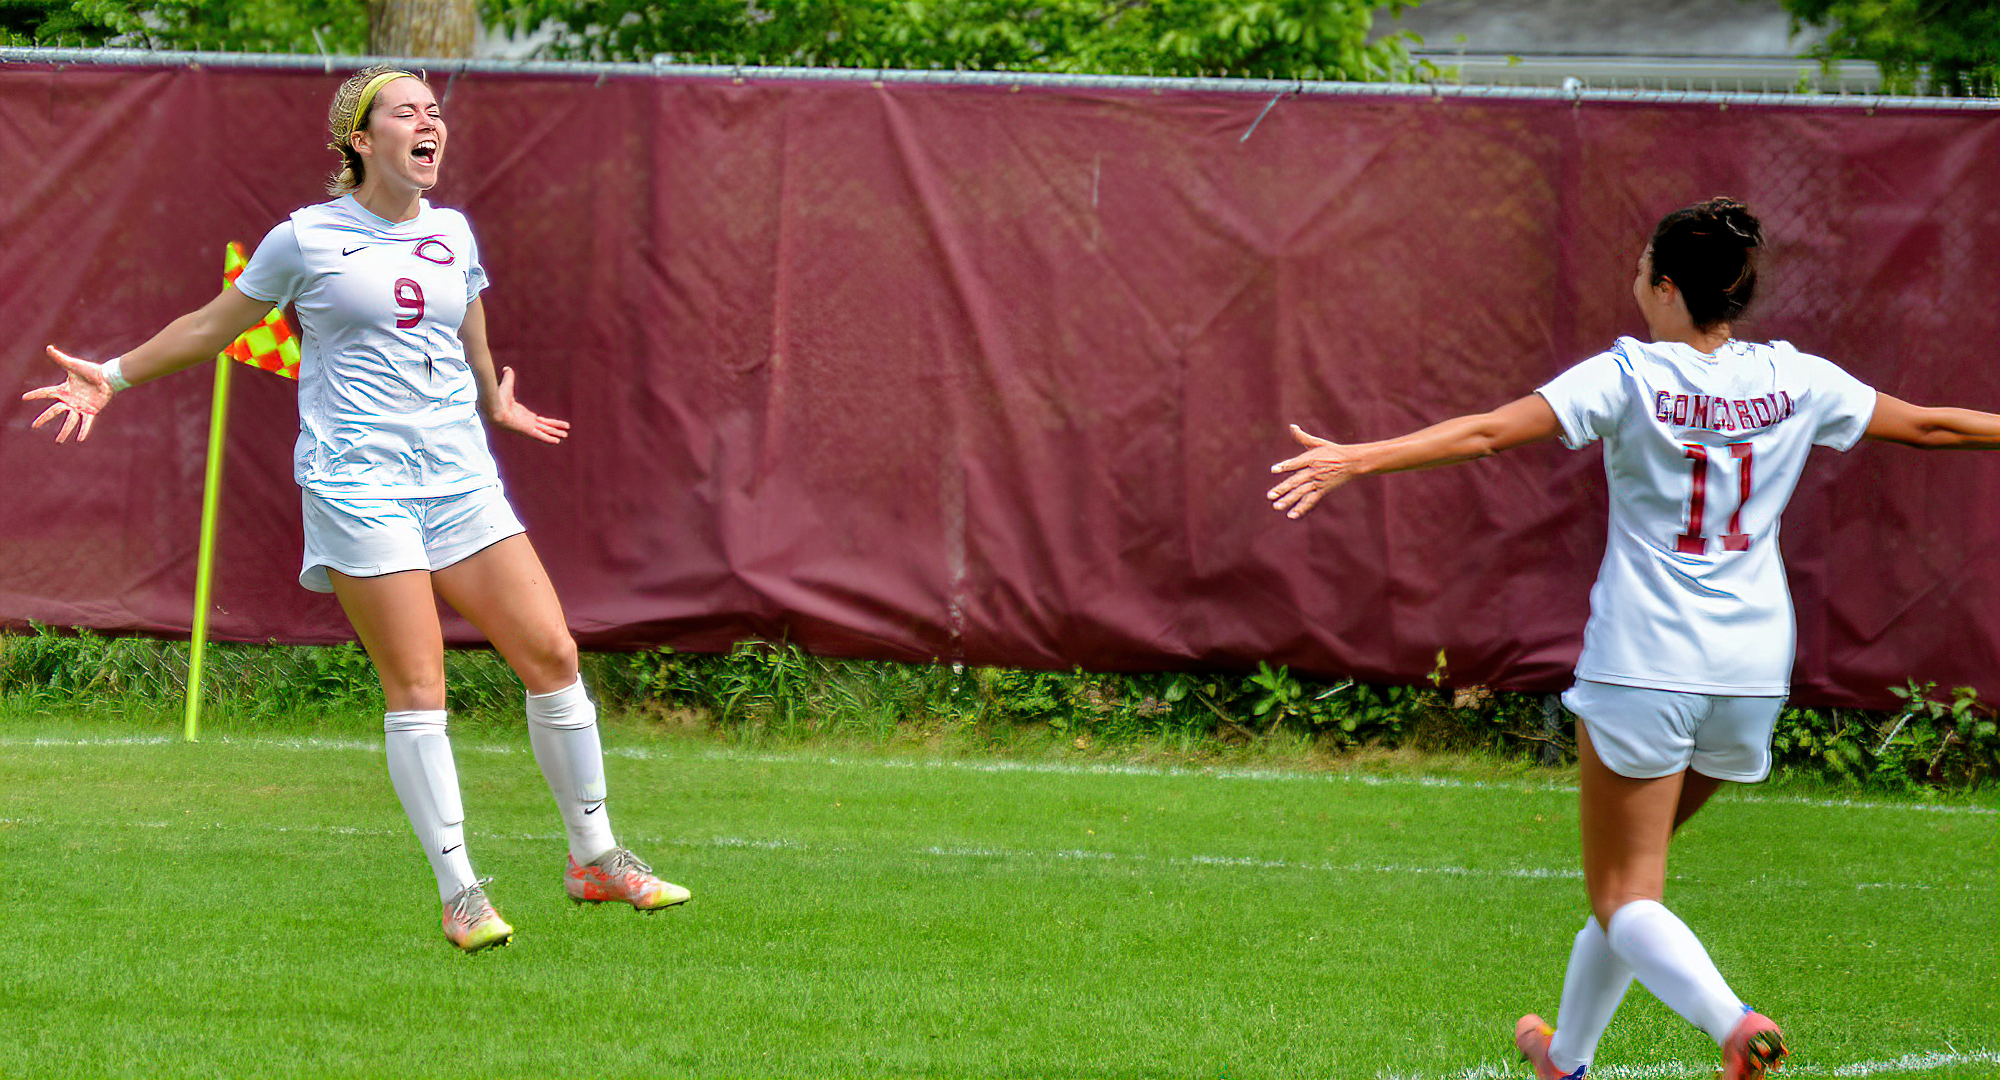 Senior Grace Lawlor celebrates her first-half, breakaway goal in the Cobbers' game with Carleton.